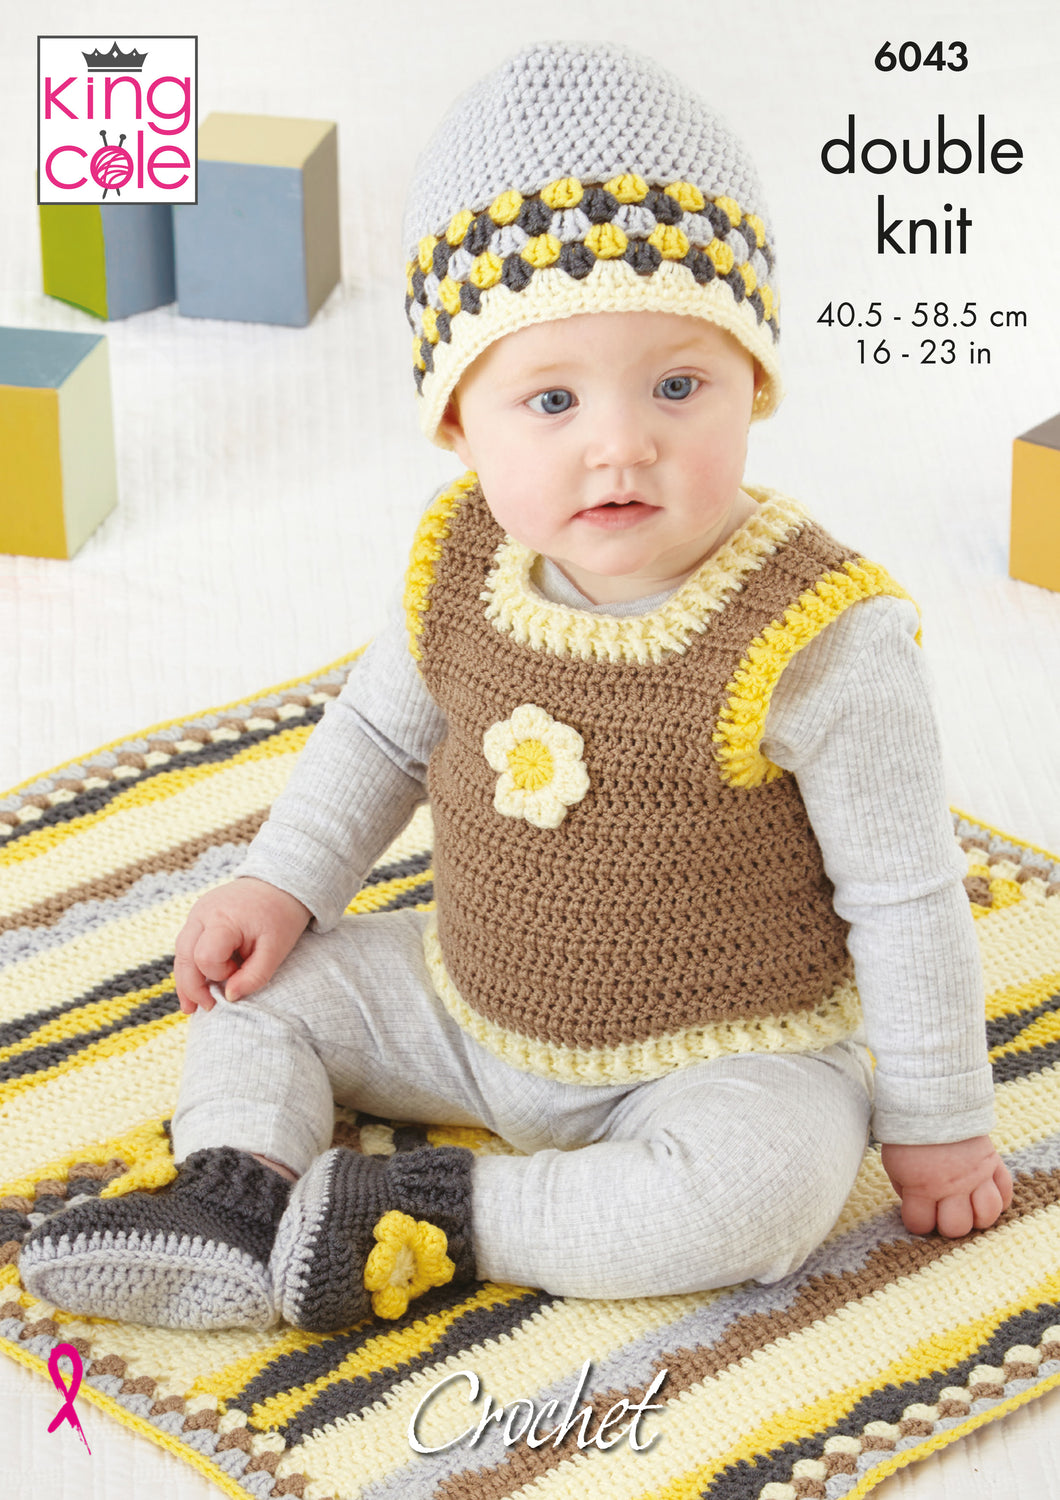 Traditional Baby Set: Crocheted in King Cole Cherished DK 6043